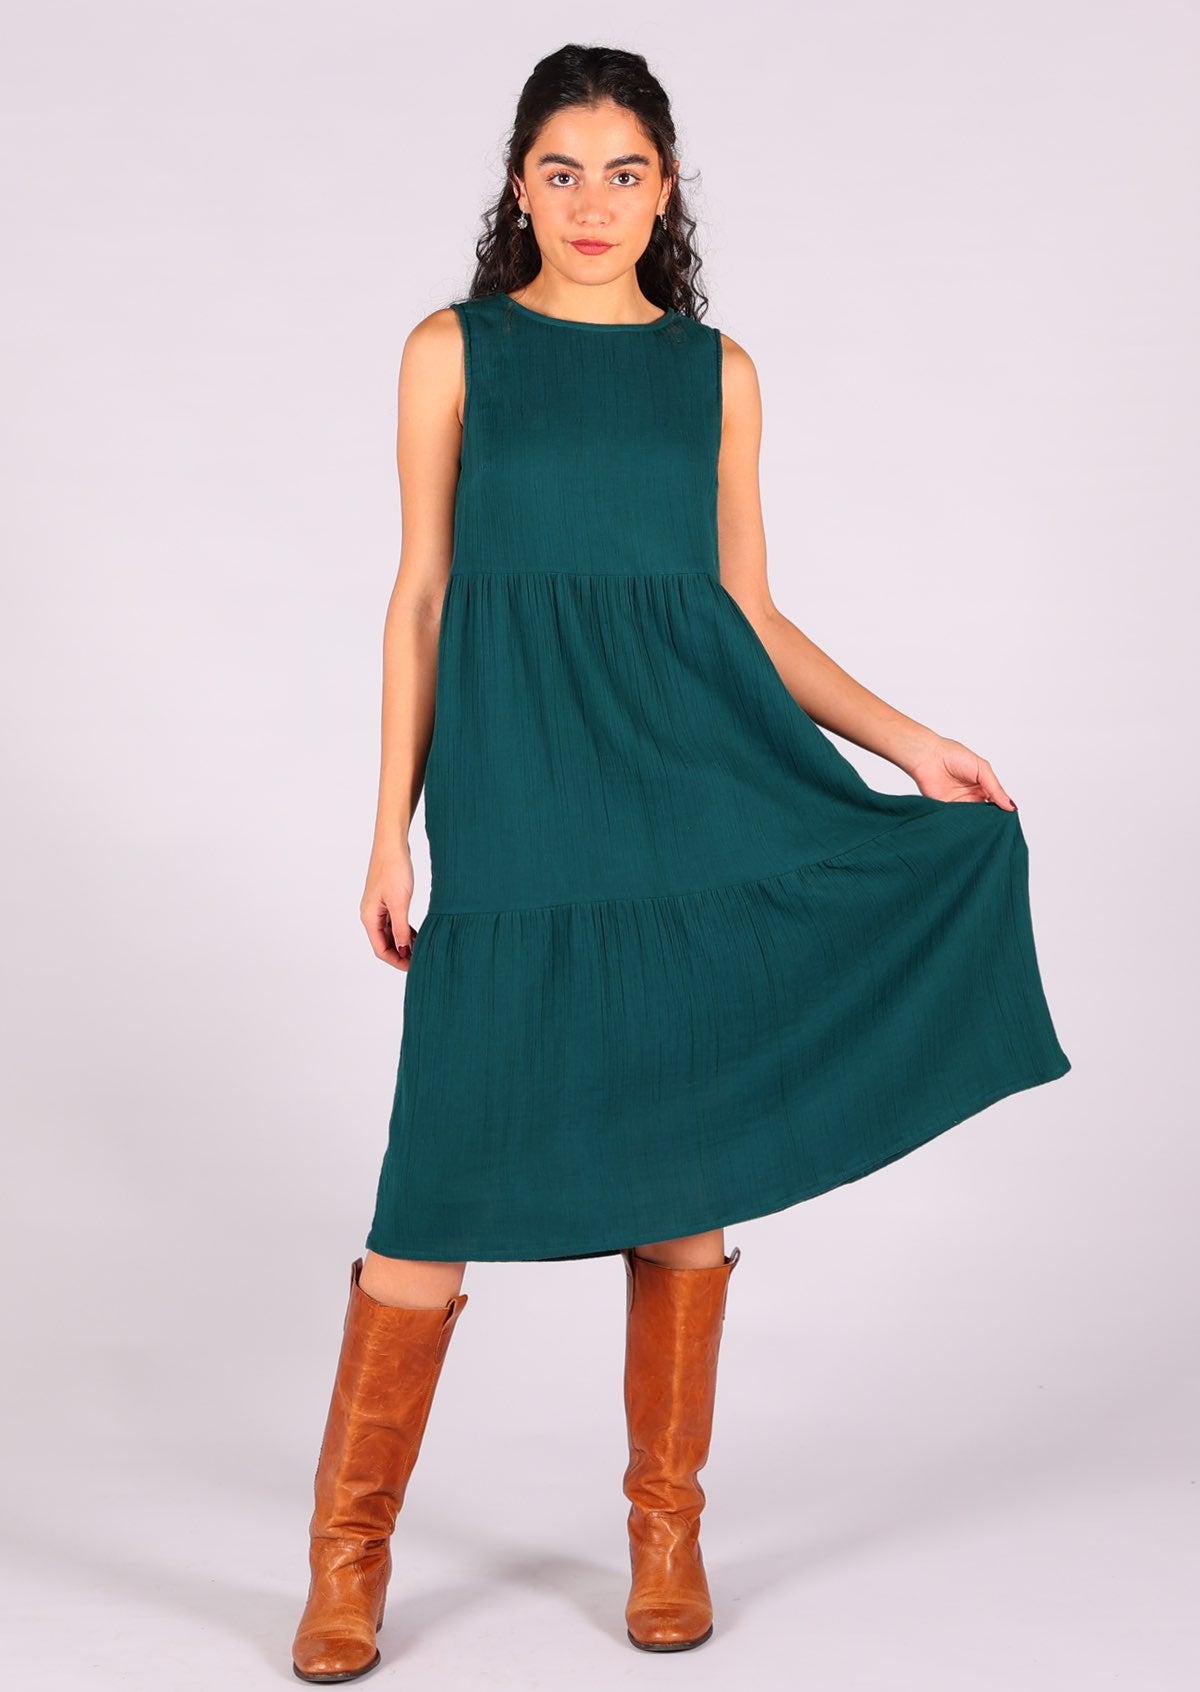 Sleeveless double cotton dress with 3 tiers in dark teal